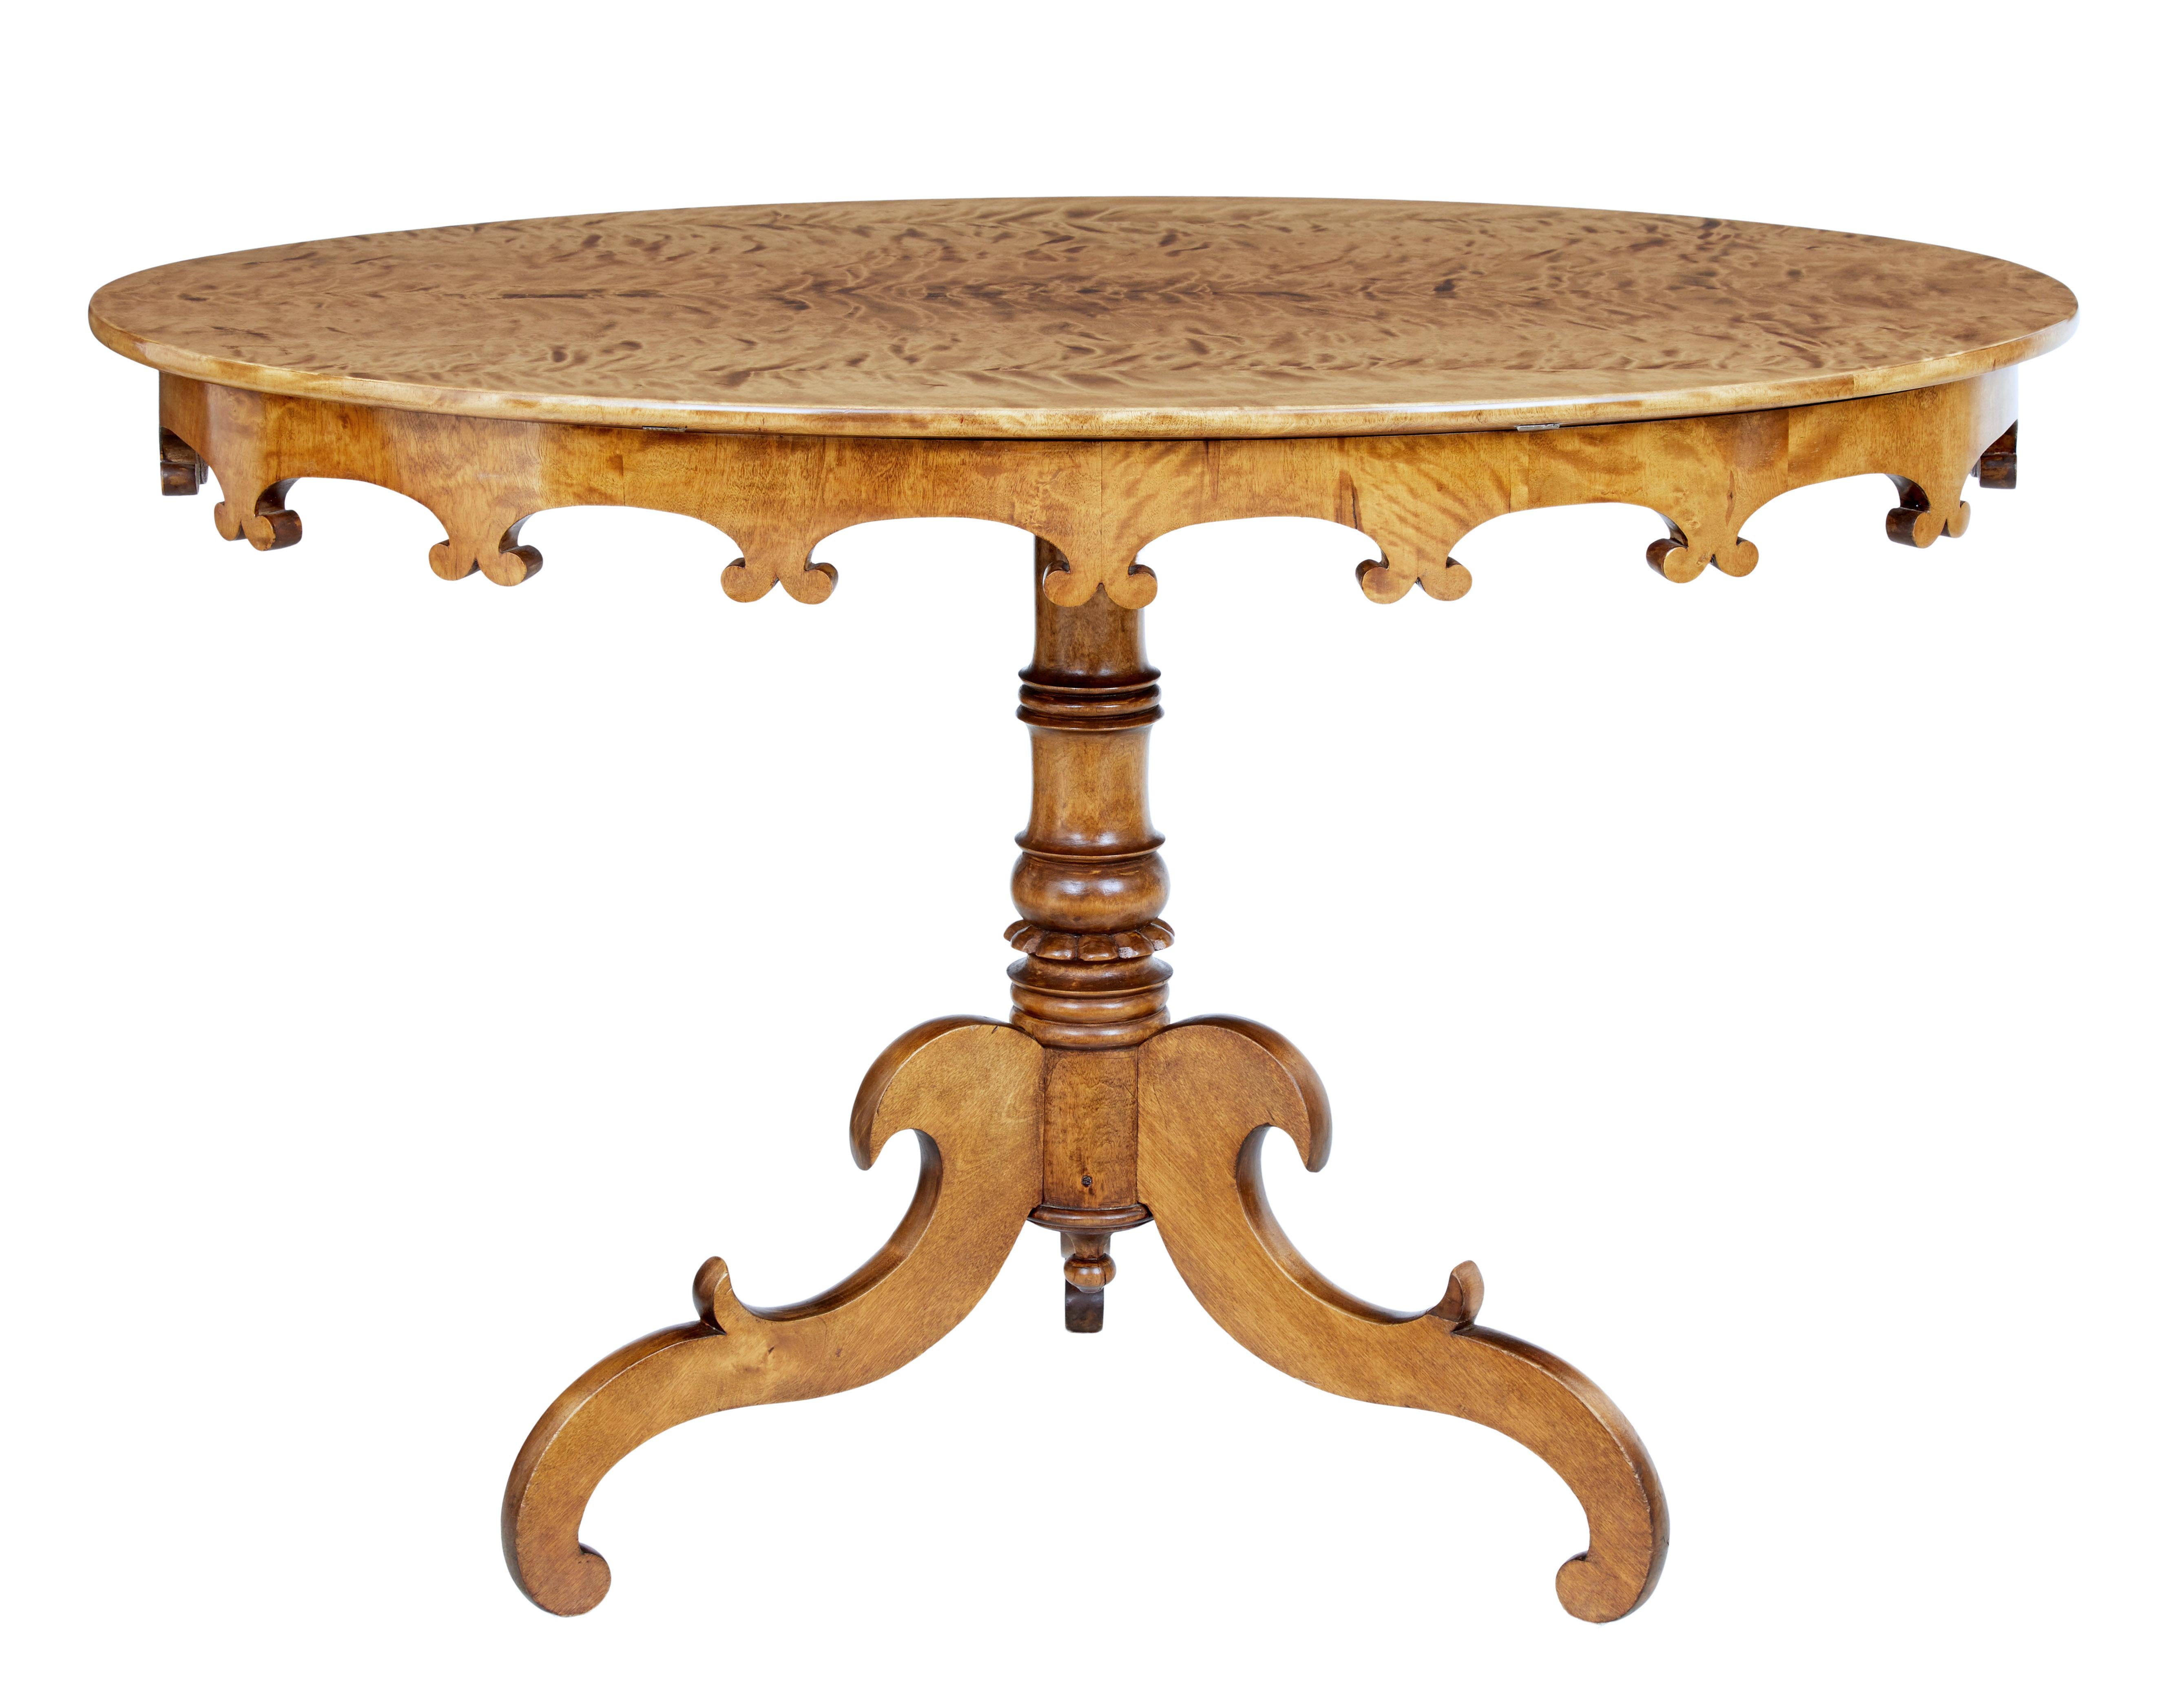 A Swedish burr birch wood occasional table circa 1890 with oval top, carved apron, turned pedestal and tripod base made of delicately carved legs. Experience the charm of 19th century Swedish craftsmanship with this beautifully made burr birch wood